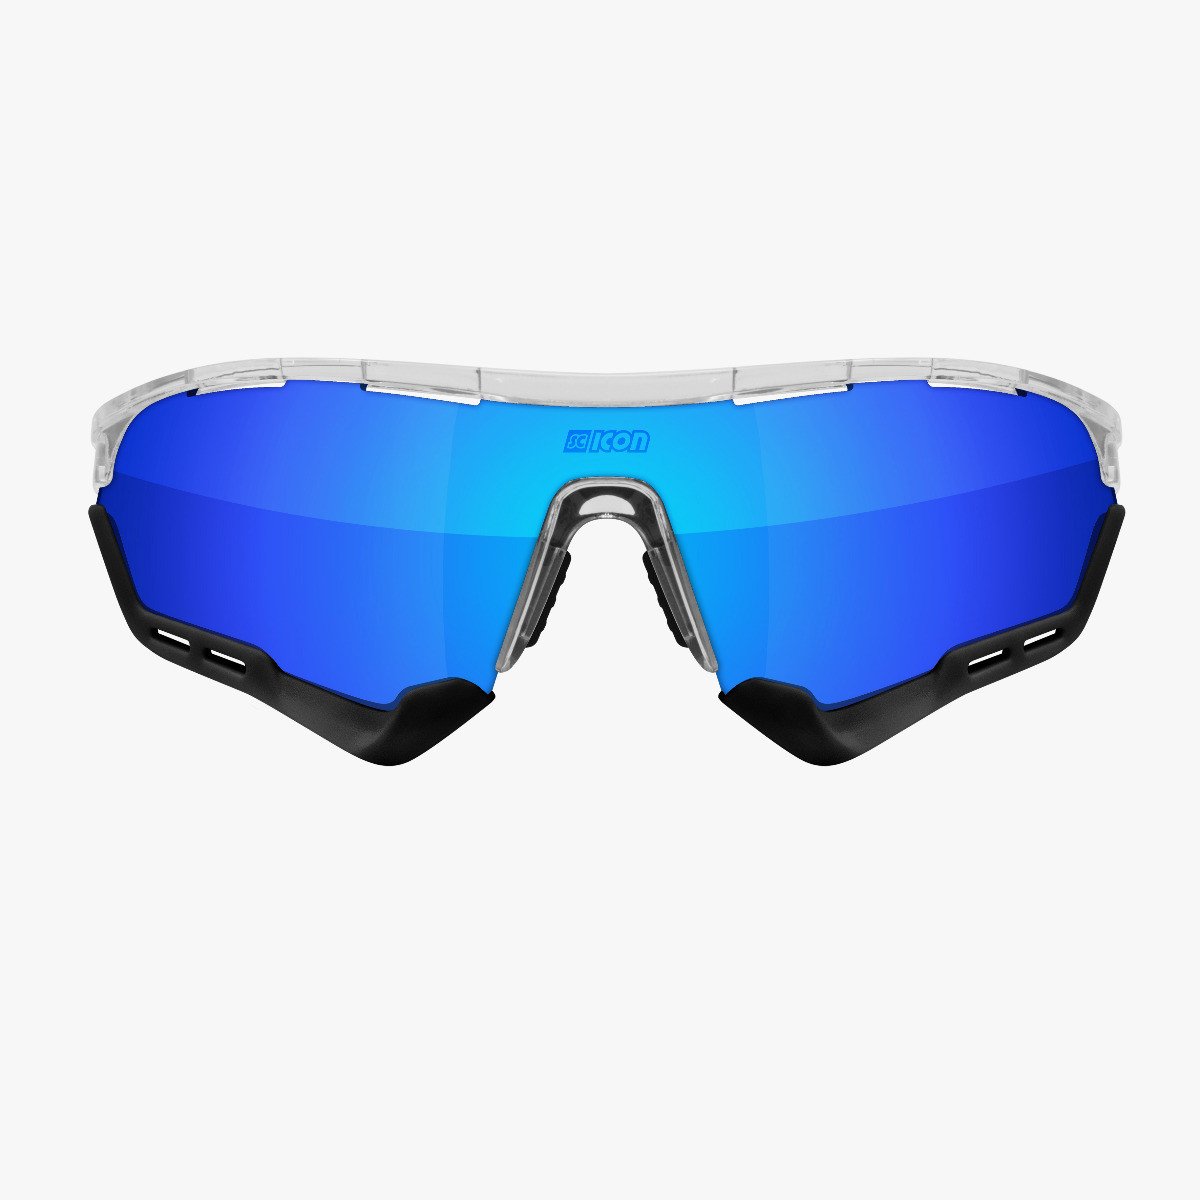 Scicon Sports | Aerotech Sport Cycling Performance Sunglasses - Crystal / Blue - EY13030702